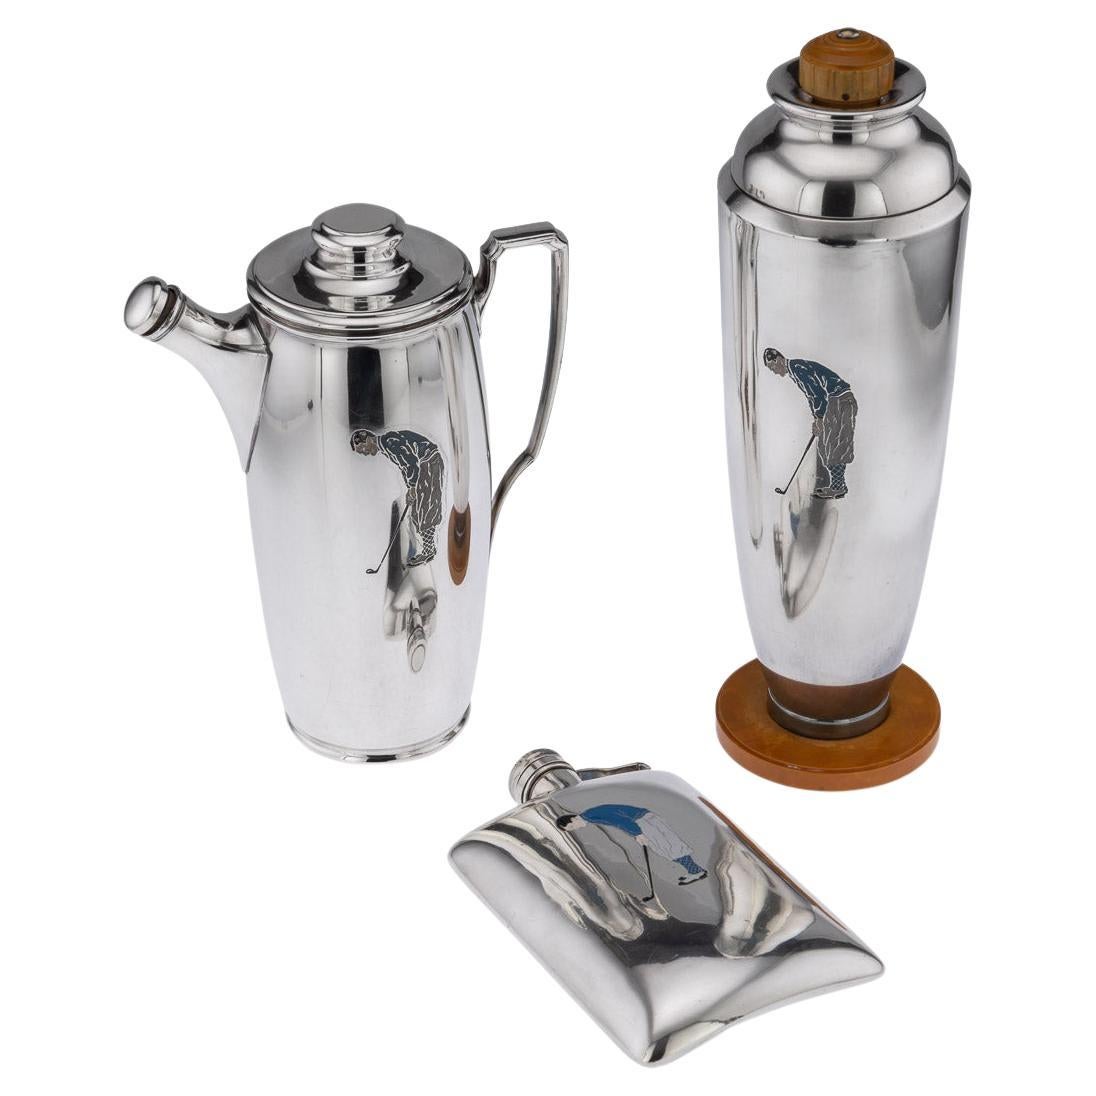 20th Century American Silver & Enamel Cocktail Shakers With Hip Flask, c.1927